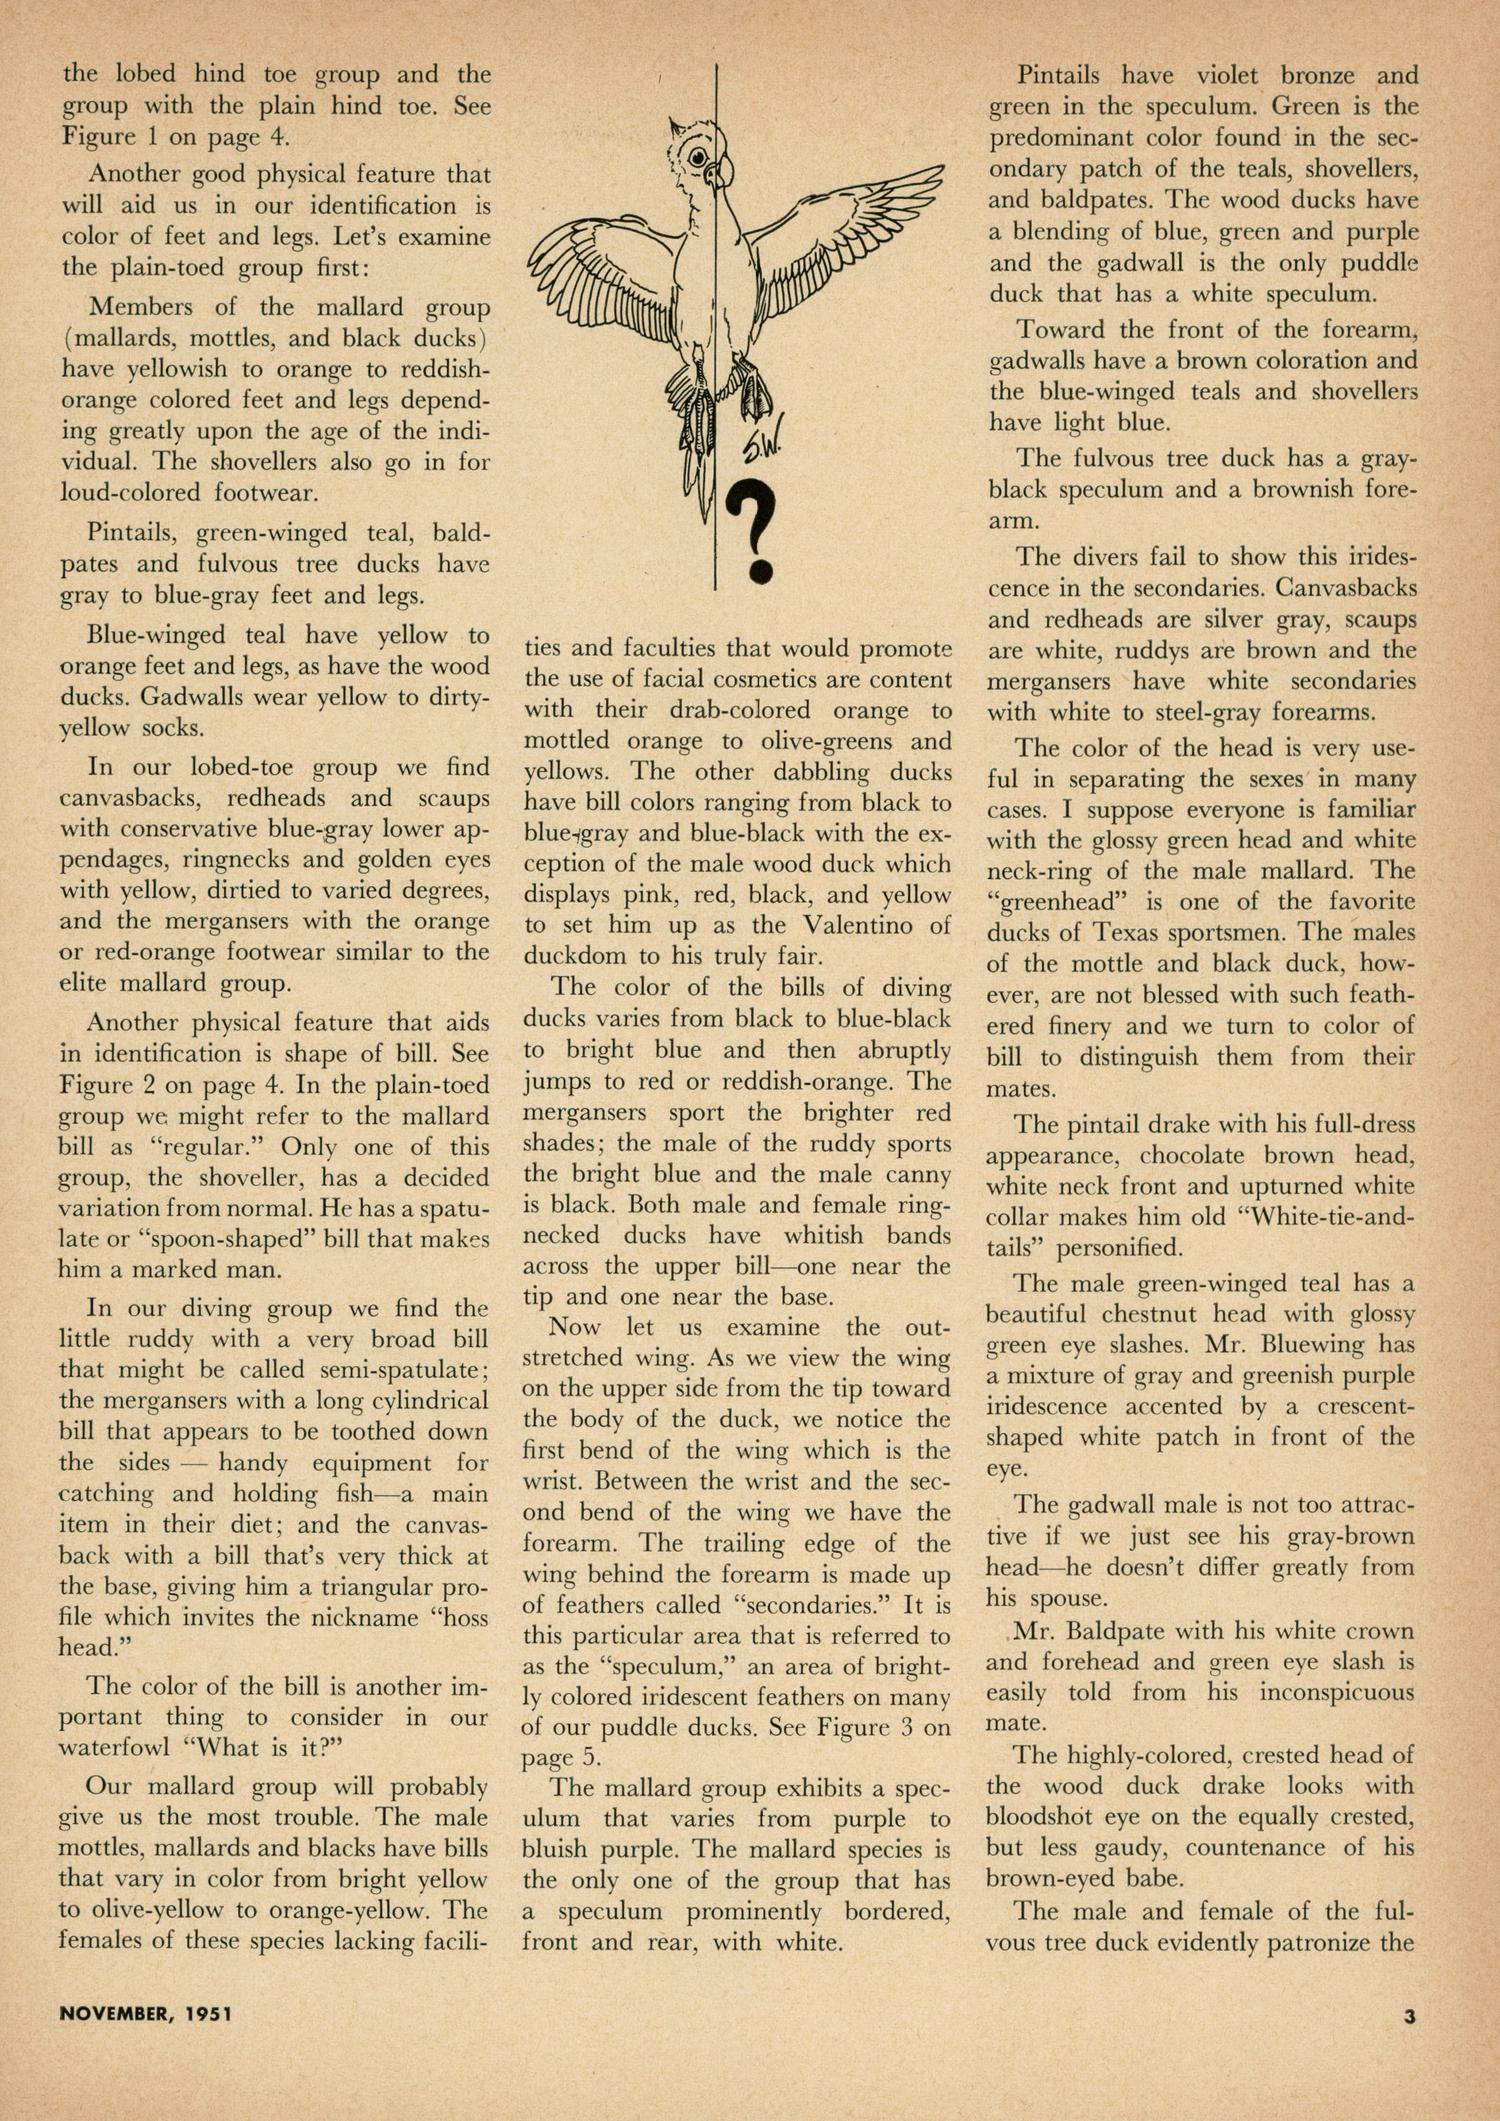 Texas Game and Fish, Volume 9, Number 12, November 1951
                                                
                                                    3
                                                